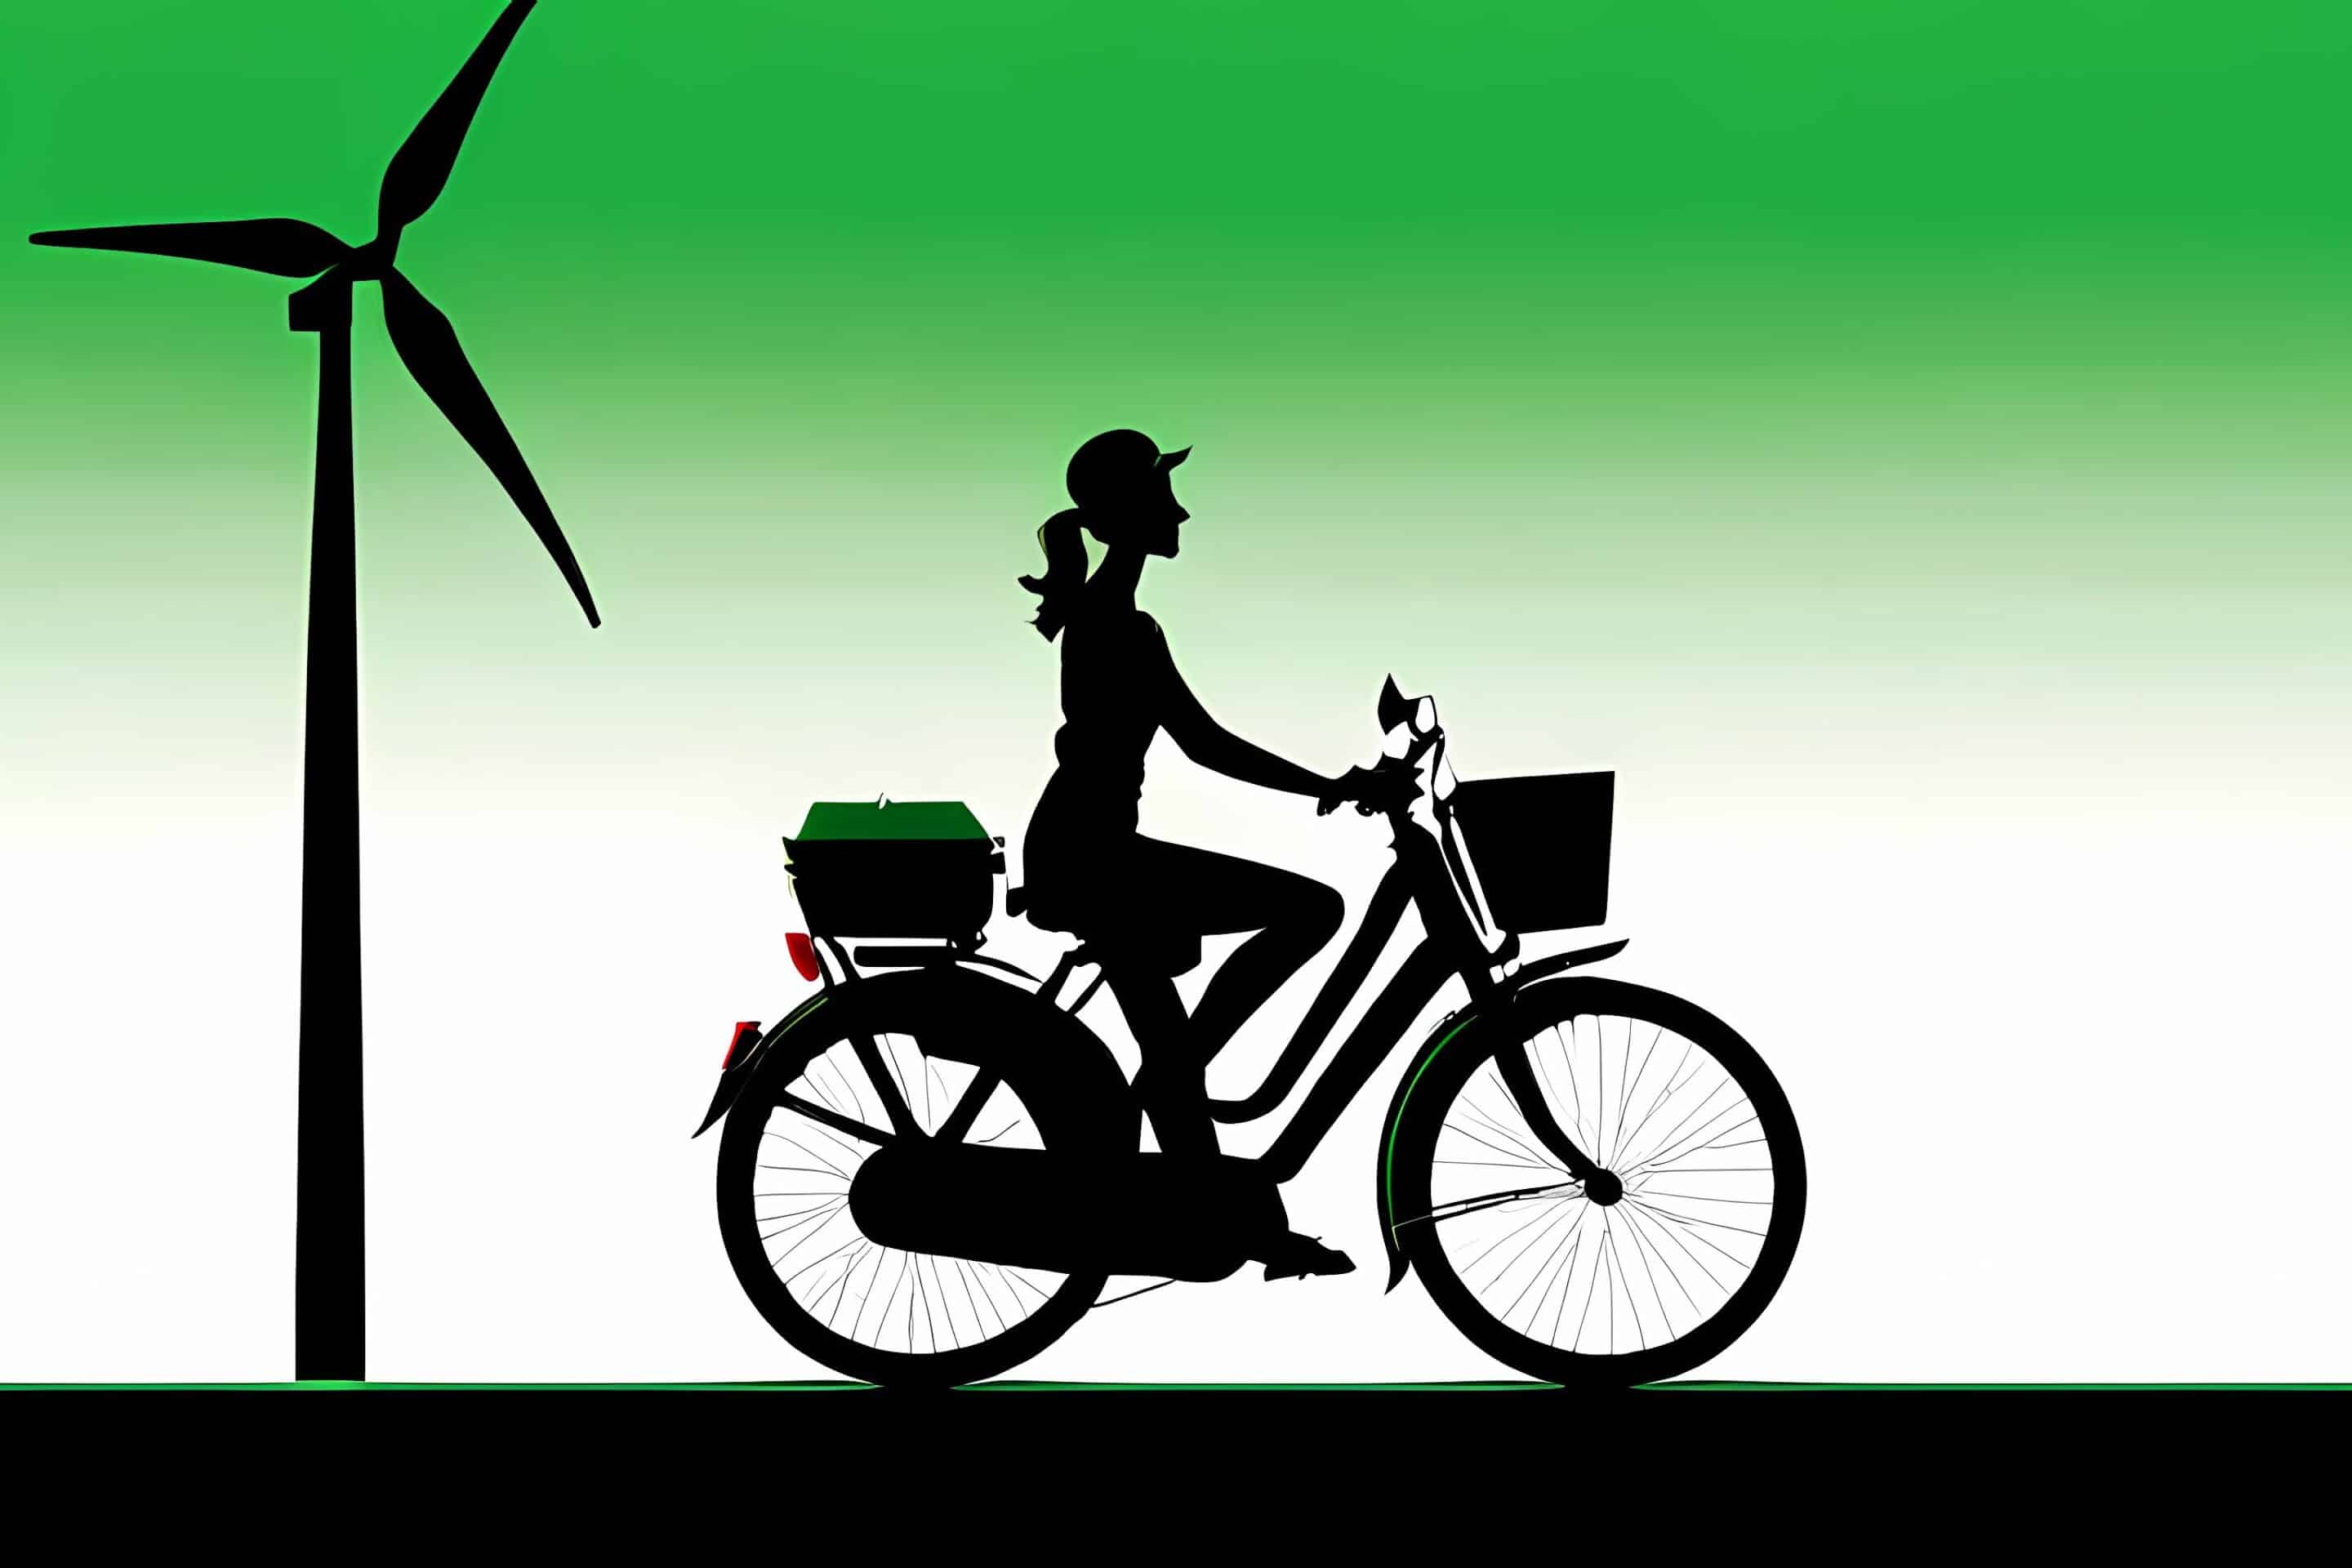 Green Transportation Choices: Toward a Sustainable Future